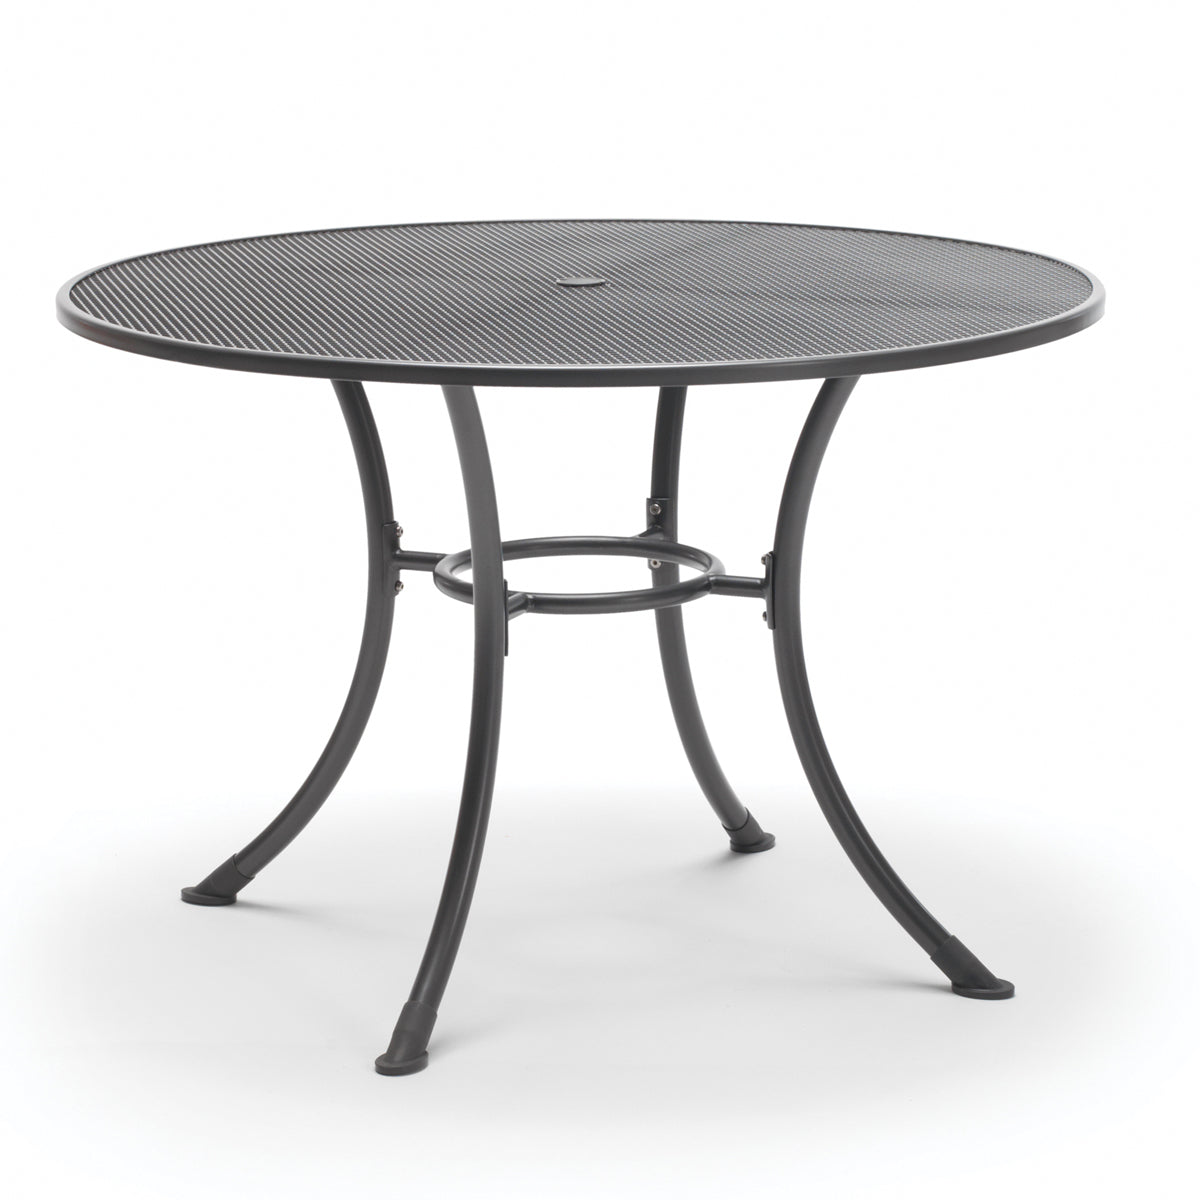 48" Round Mesh Top Table